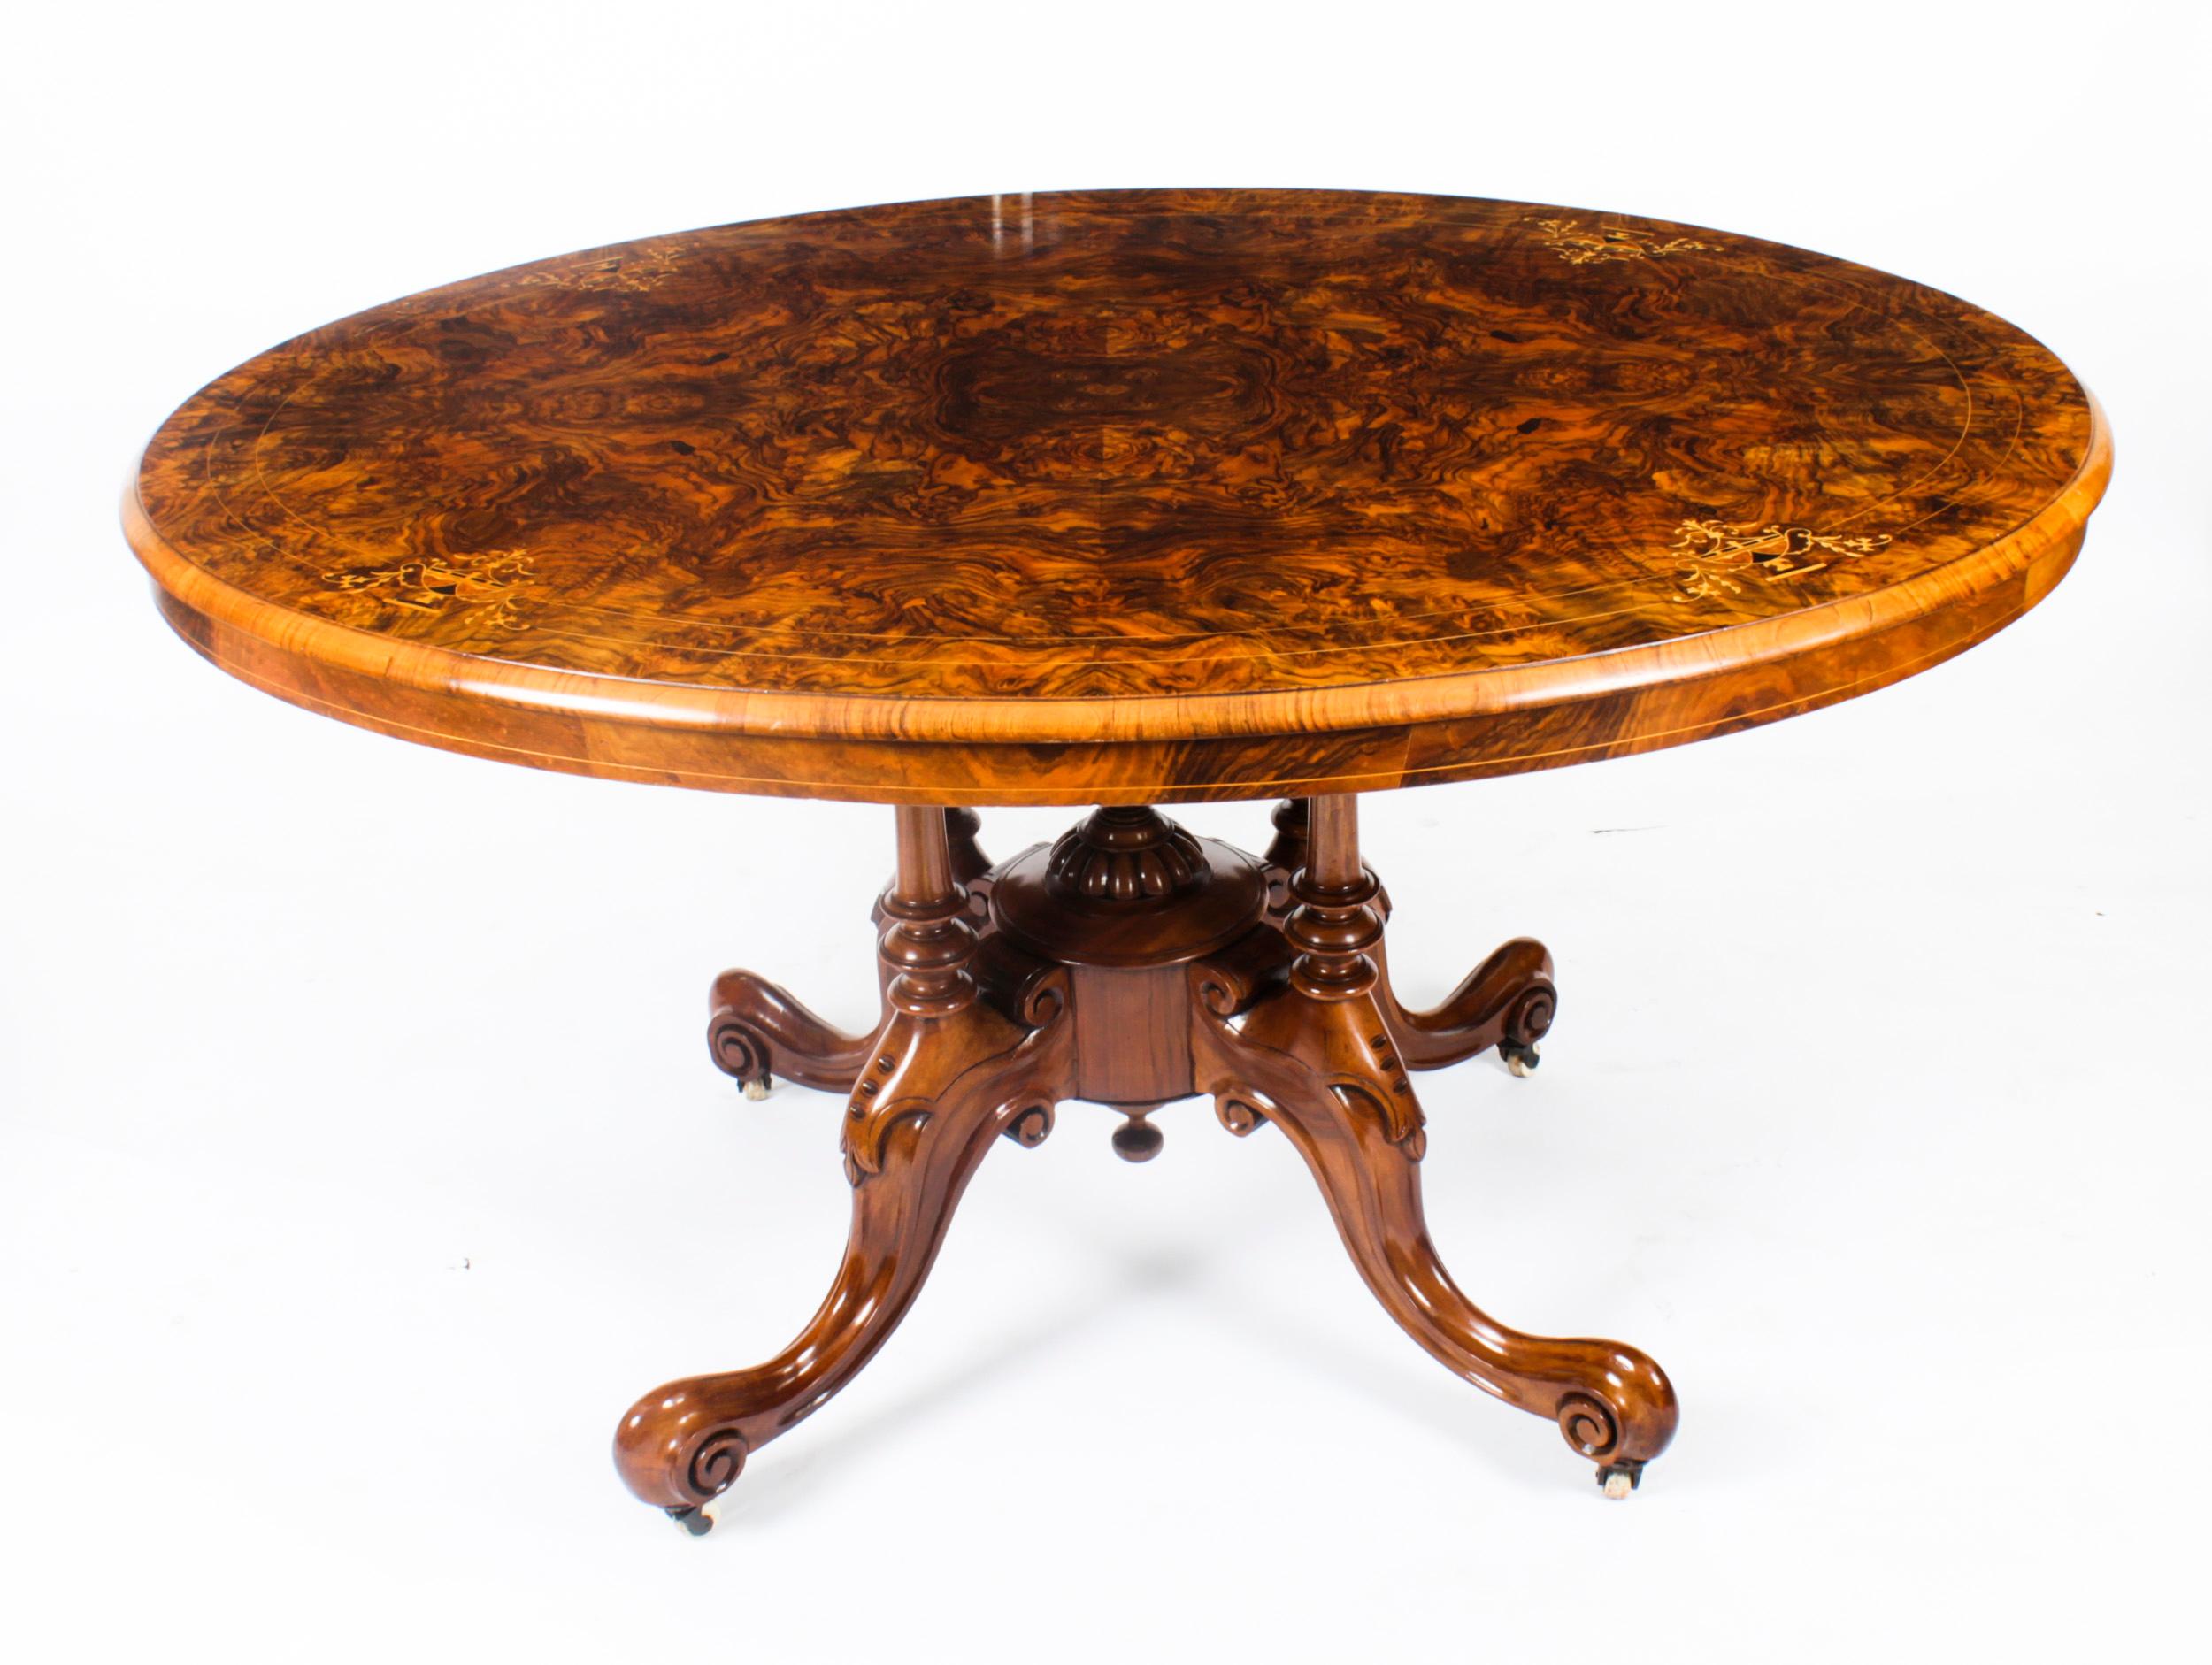 This is a superb large Victorian oval burr walnut Loo table, circa 1860 in date.
 
The beautifully figured quarter veneered oval tilt top table features superb marquetry inlaid decoration, a wonderful moulded edge and a shaped frieze. It is raised